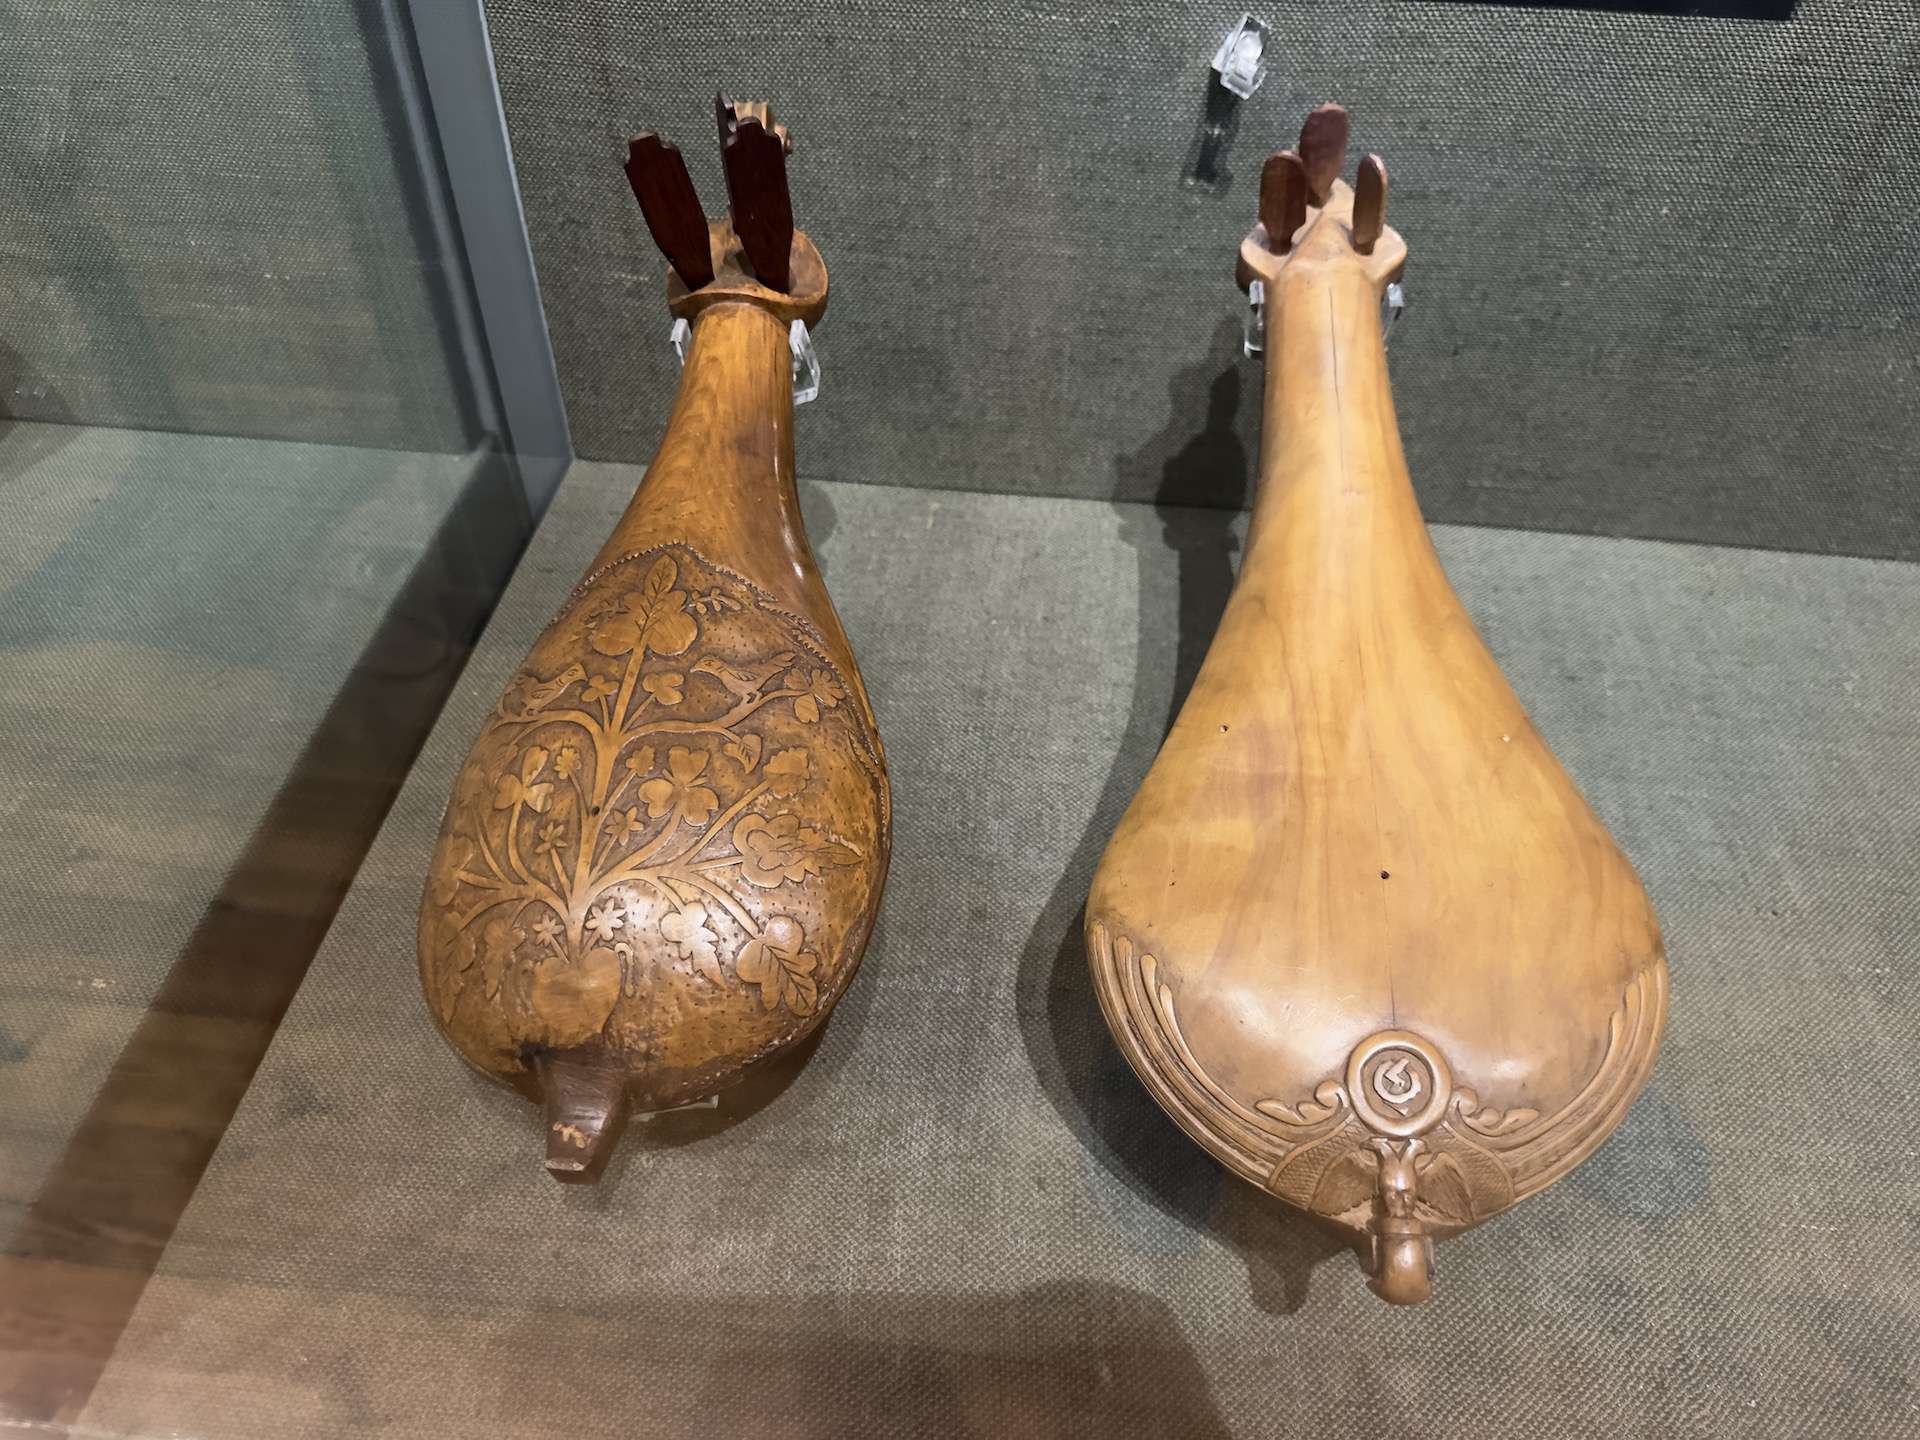 Pear-shaped lira, Dodecanese (left); Pear-shaped lira, Ikaria, 1946 (right) at the Museum of Greek Folk Musical Instruments in Athens, Greece